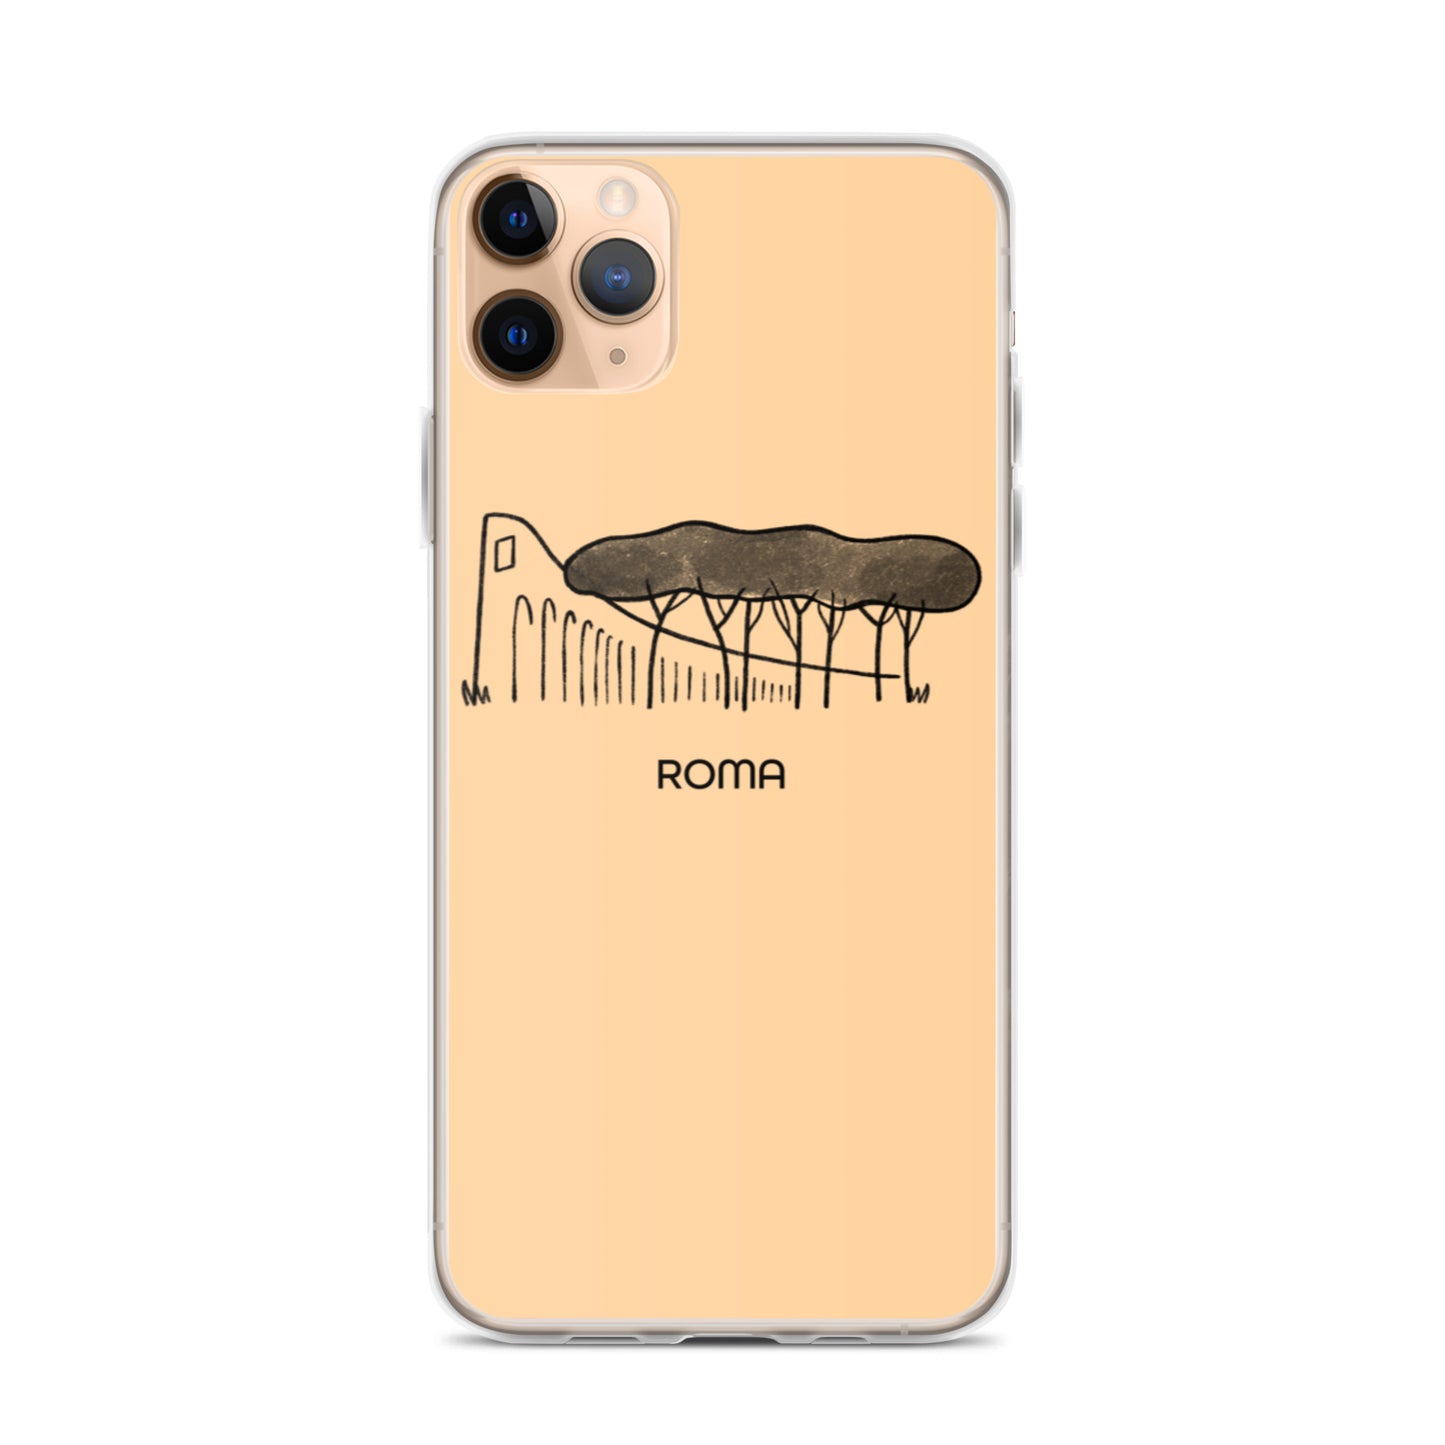 Roman Pine Trees on an iPhone Case - Rome's yellow-colored buildings